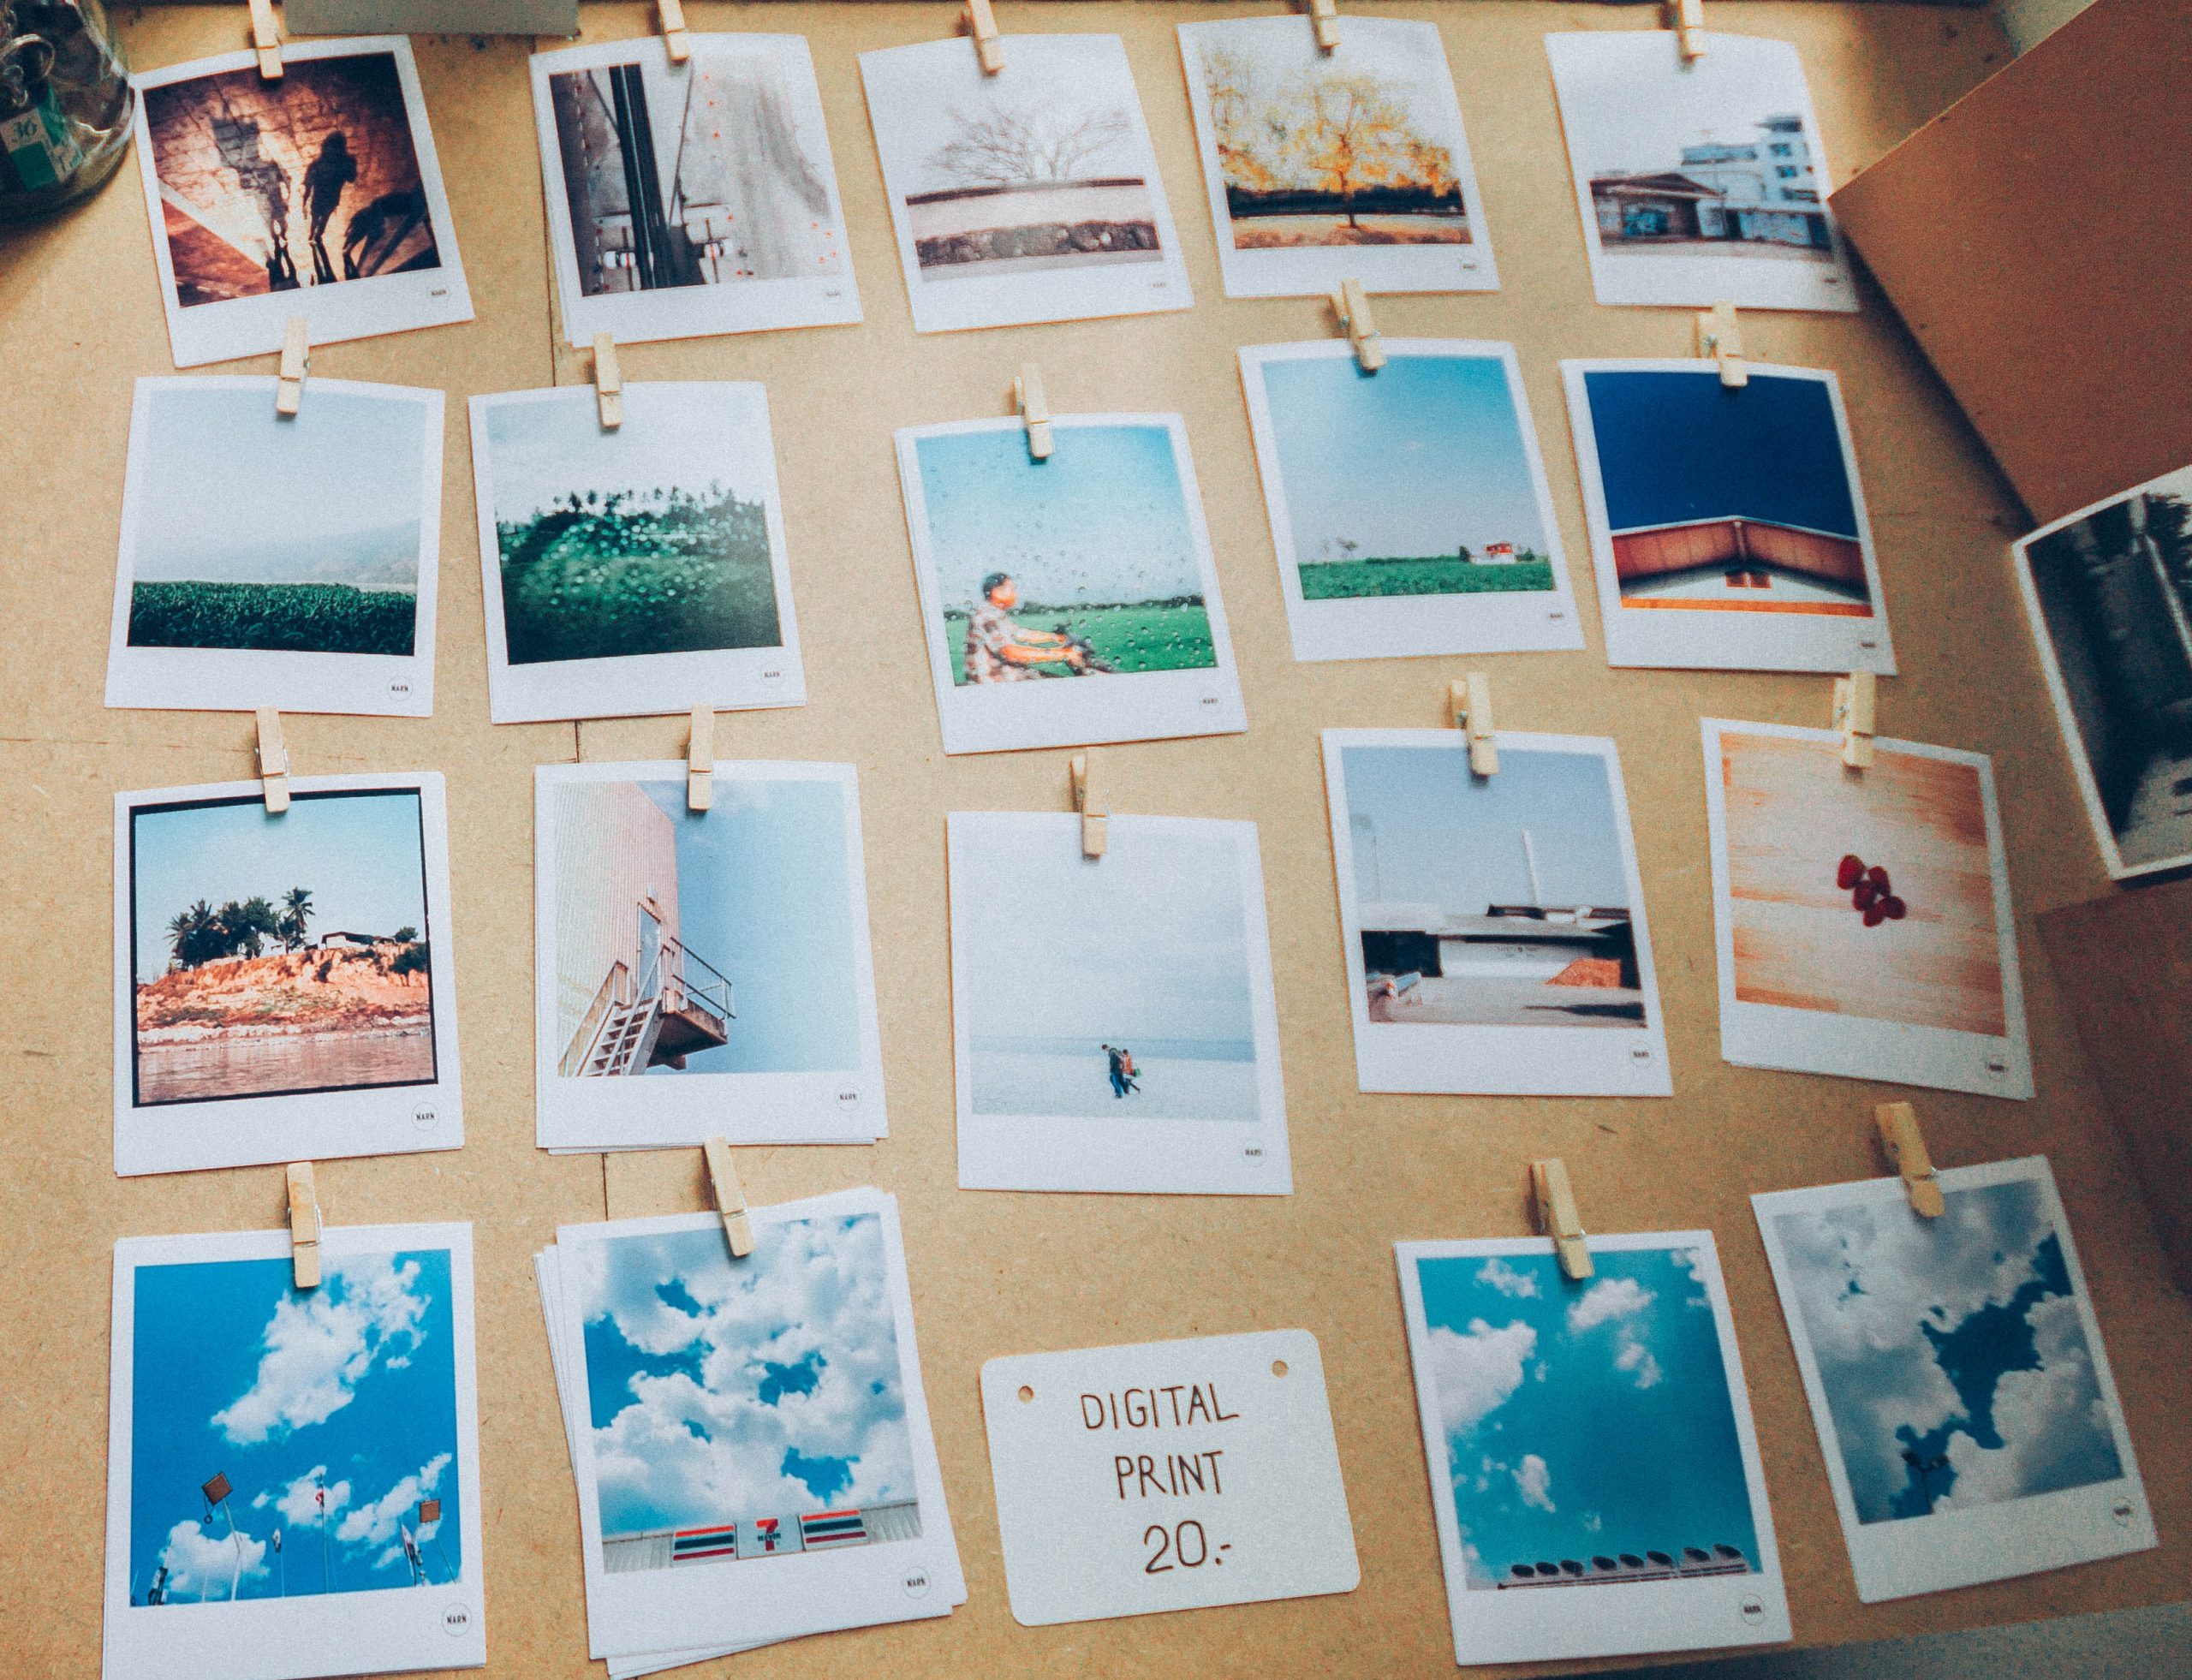 Photograph of a table on which some Polaroids depicting different subjects are arranged